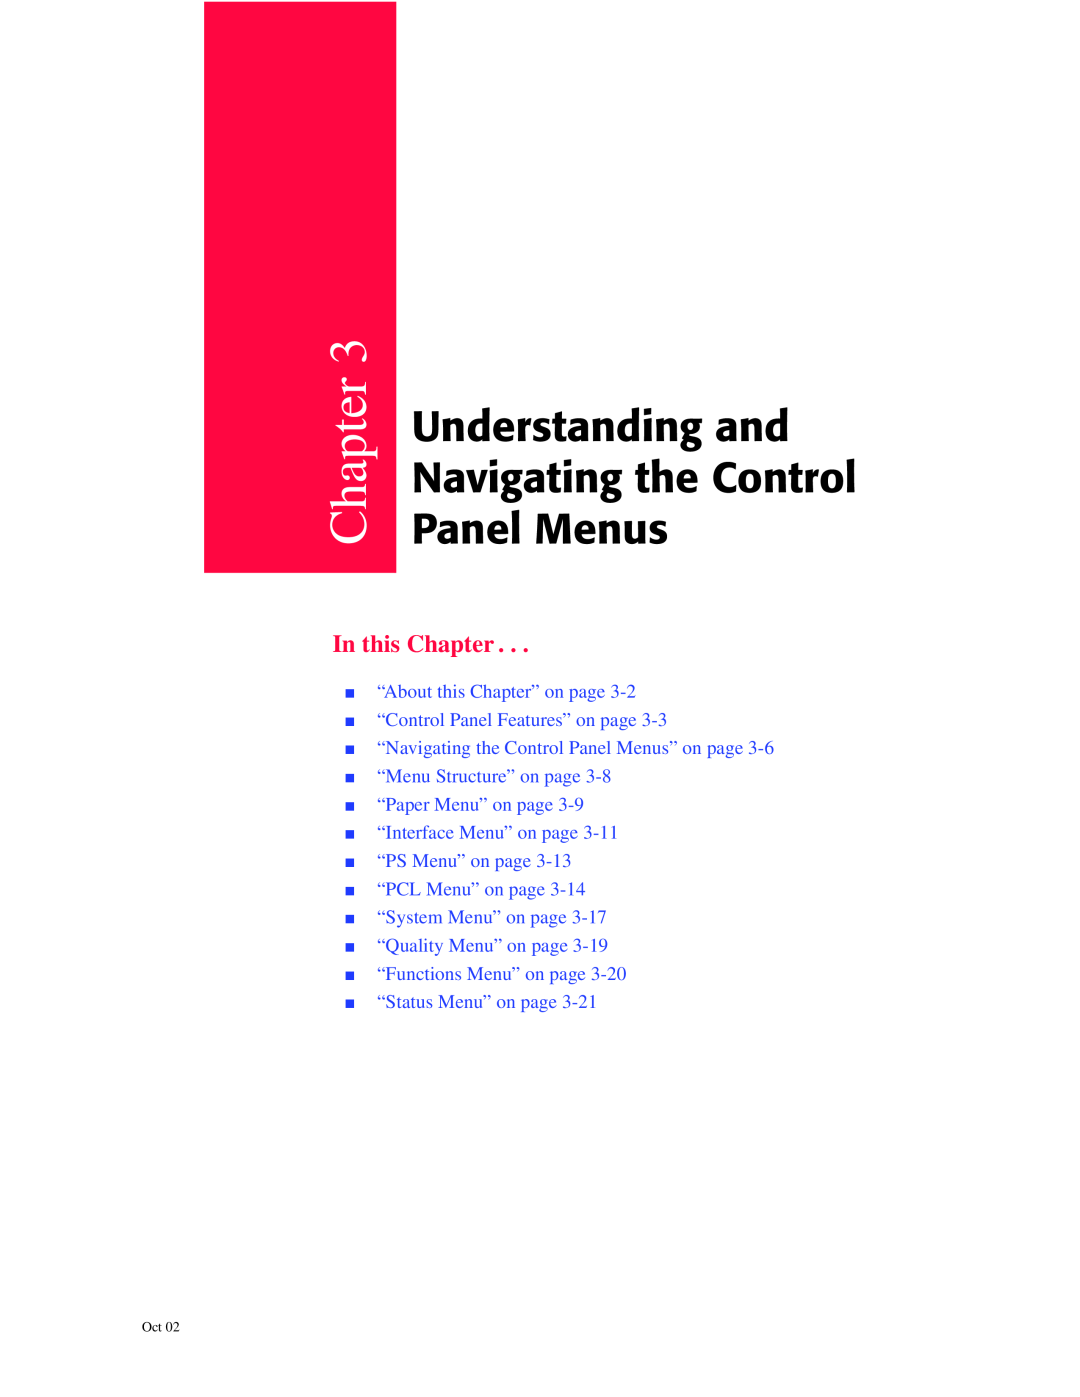 Oki 6100 manual Understanding and Navigating the Control Panel Menus, In this Chapter 